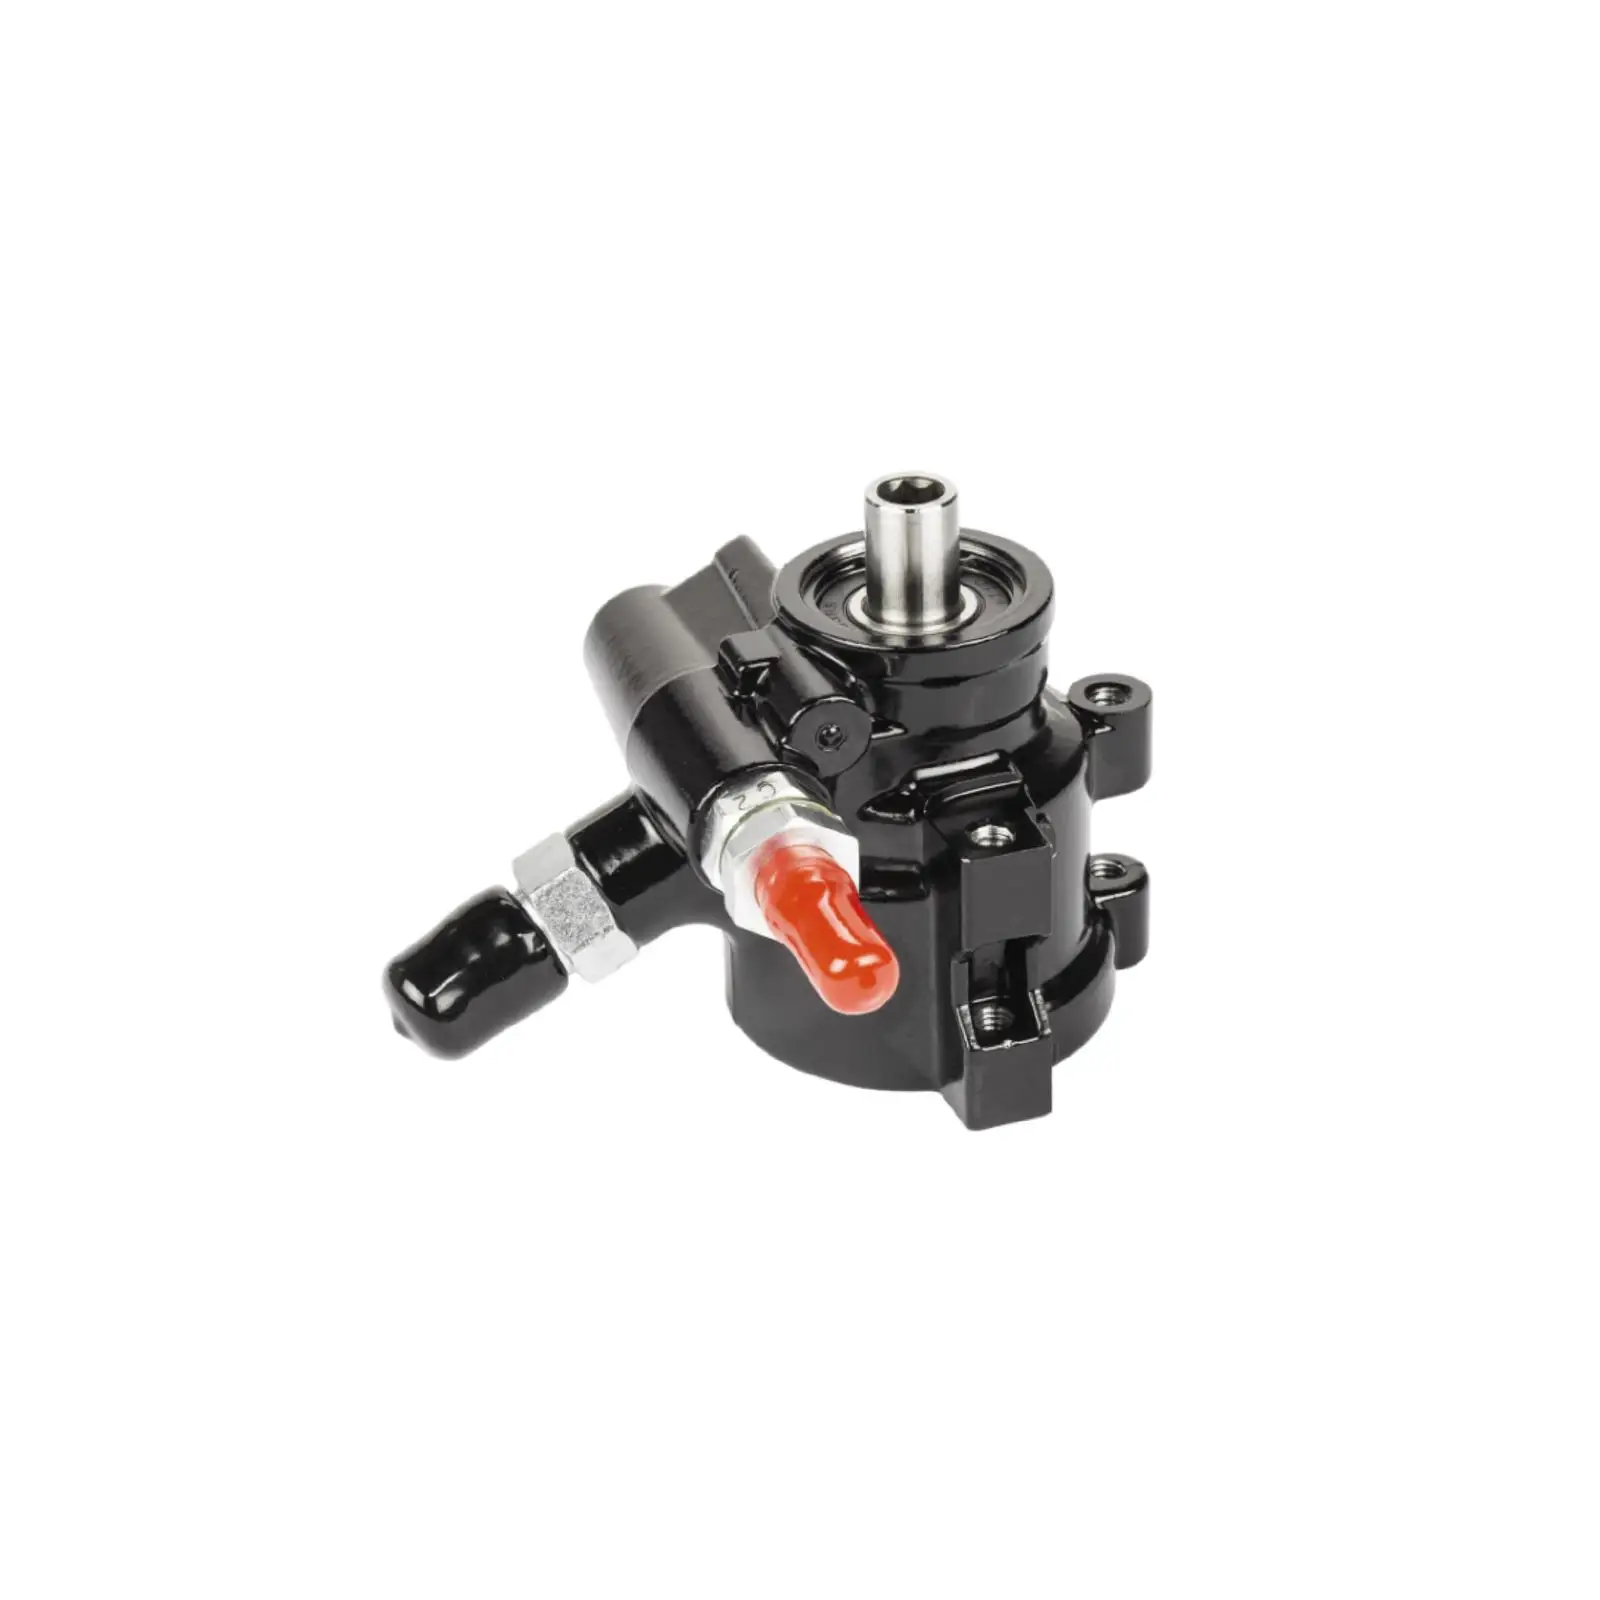 Power Steering Pump Car Accessories for Saginaw TC Type 2 Professional